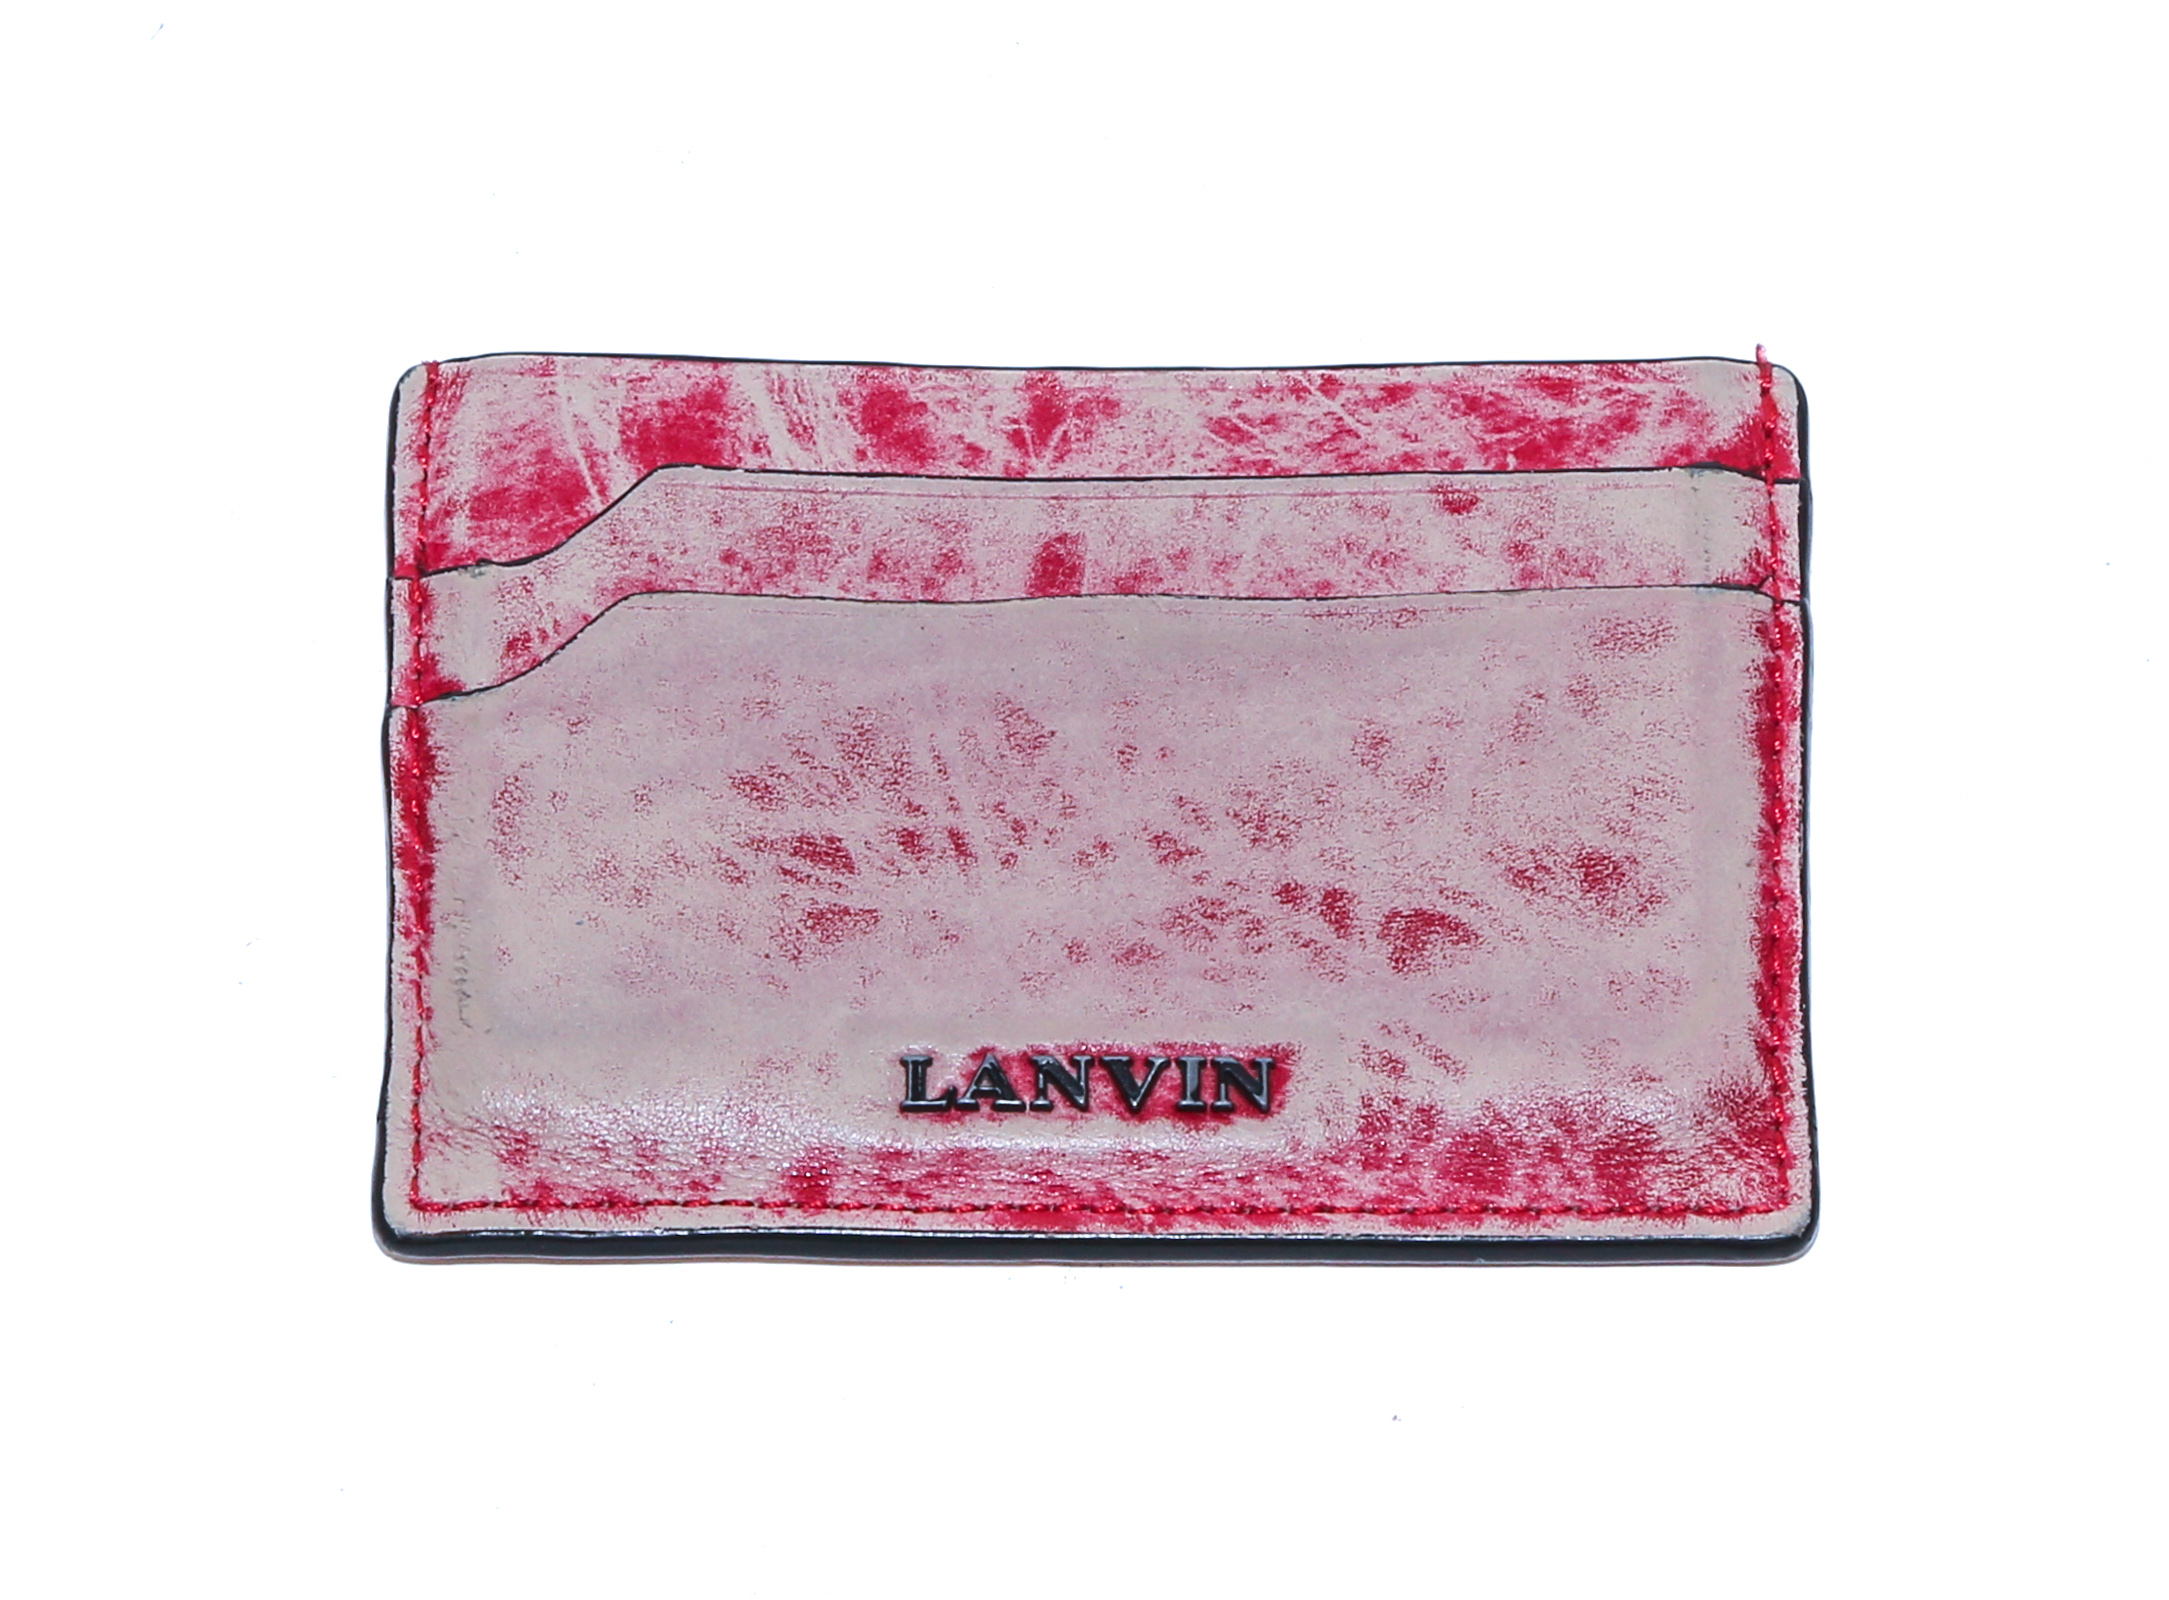 A LANVIN LEATHER CARD HOLDER A 308a70